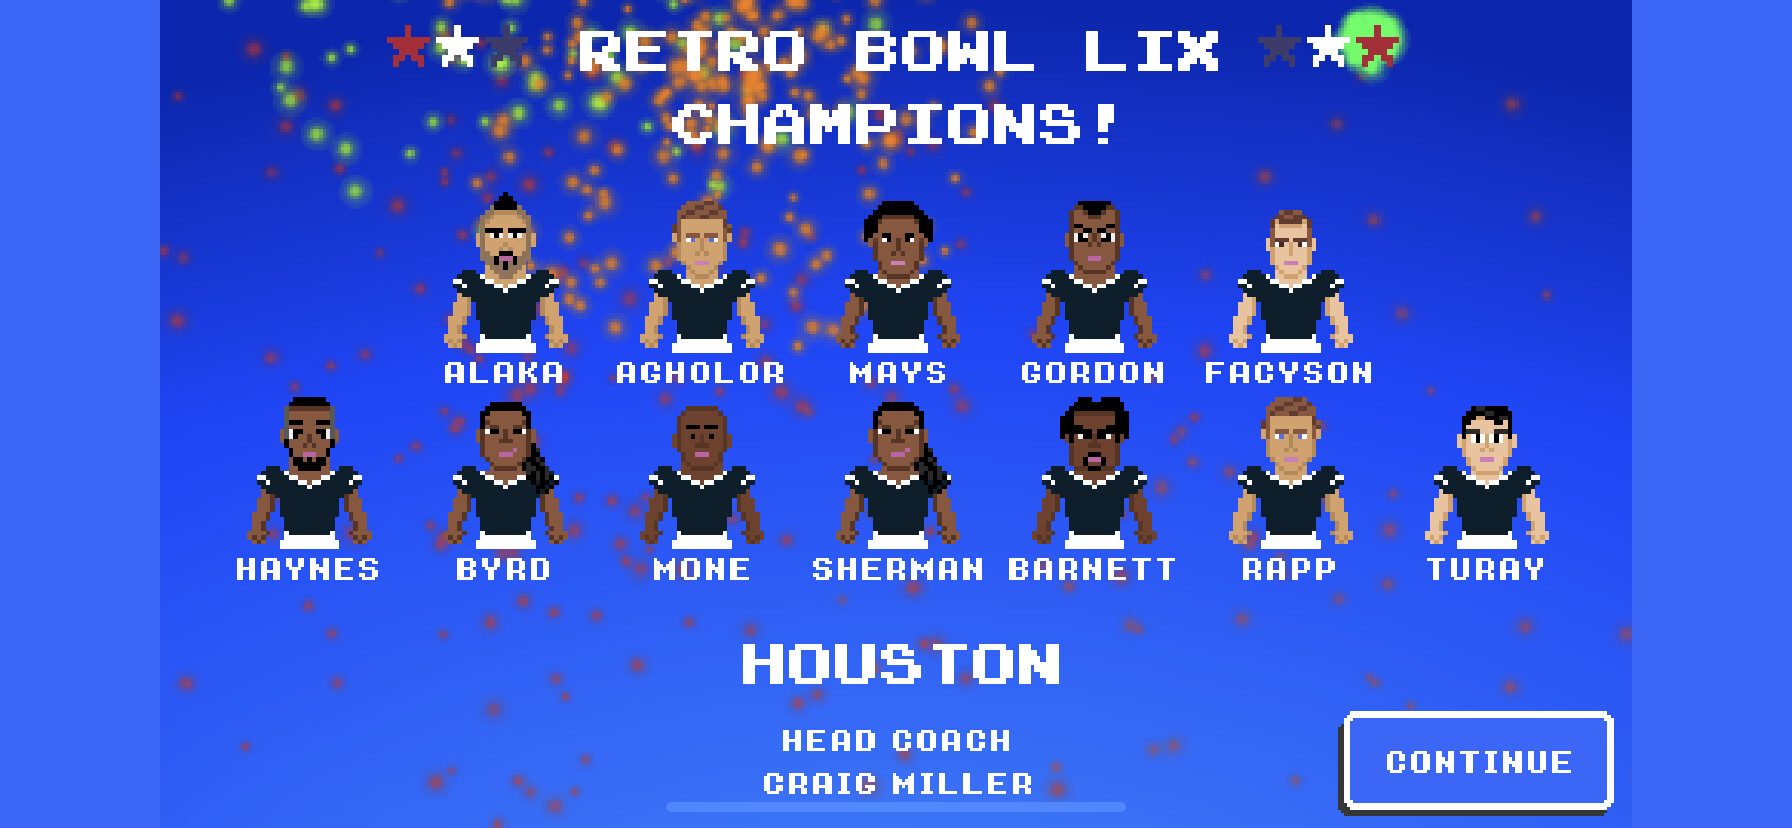 Retro Bowl needs its own thread - #39 by Left_Empty - Games